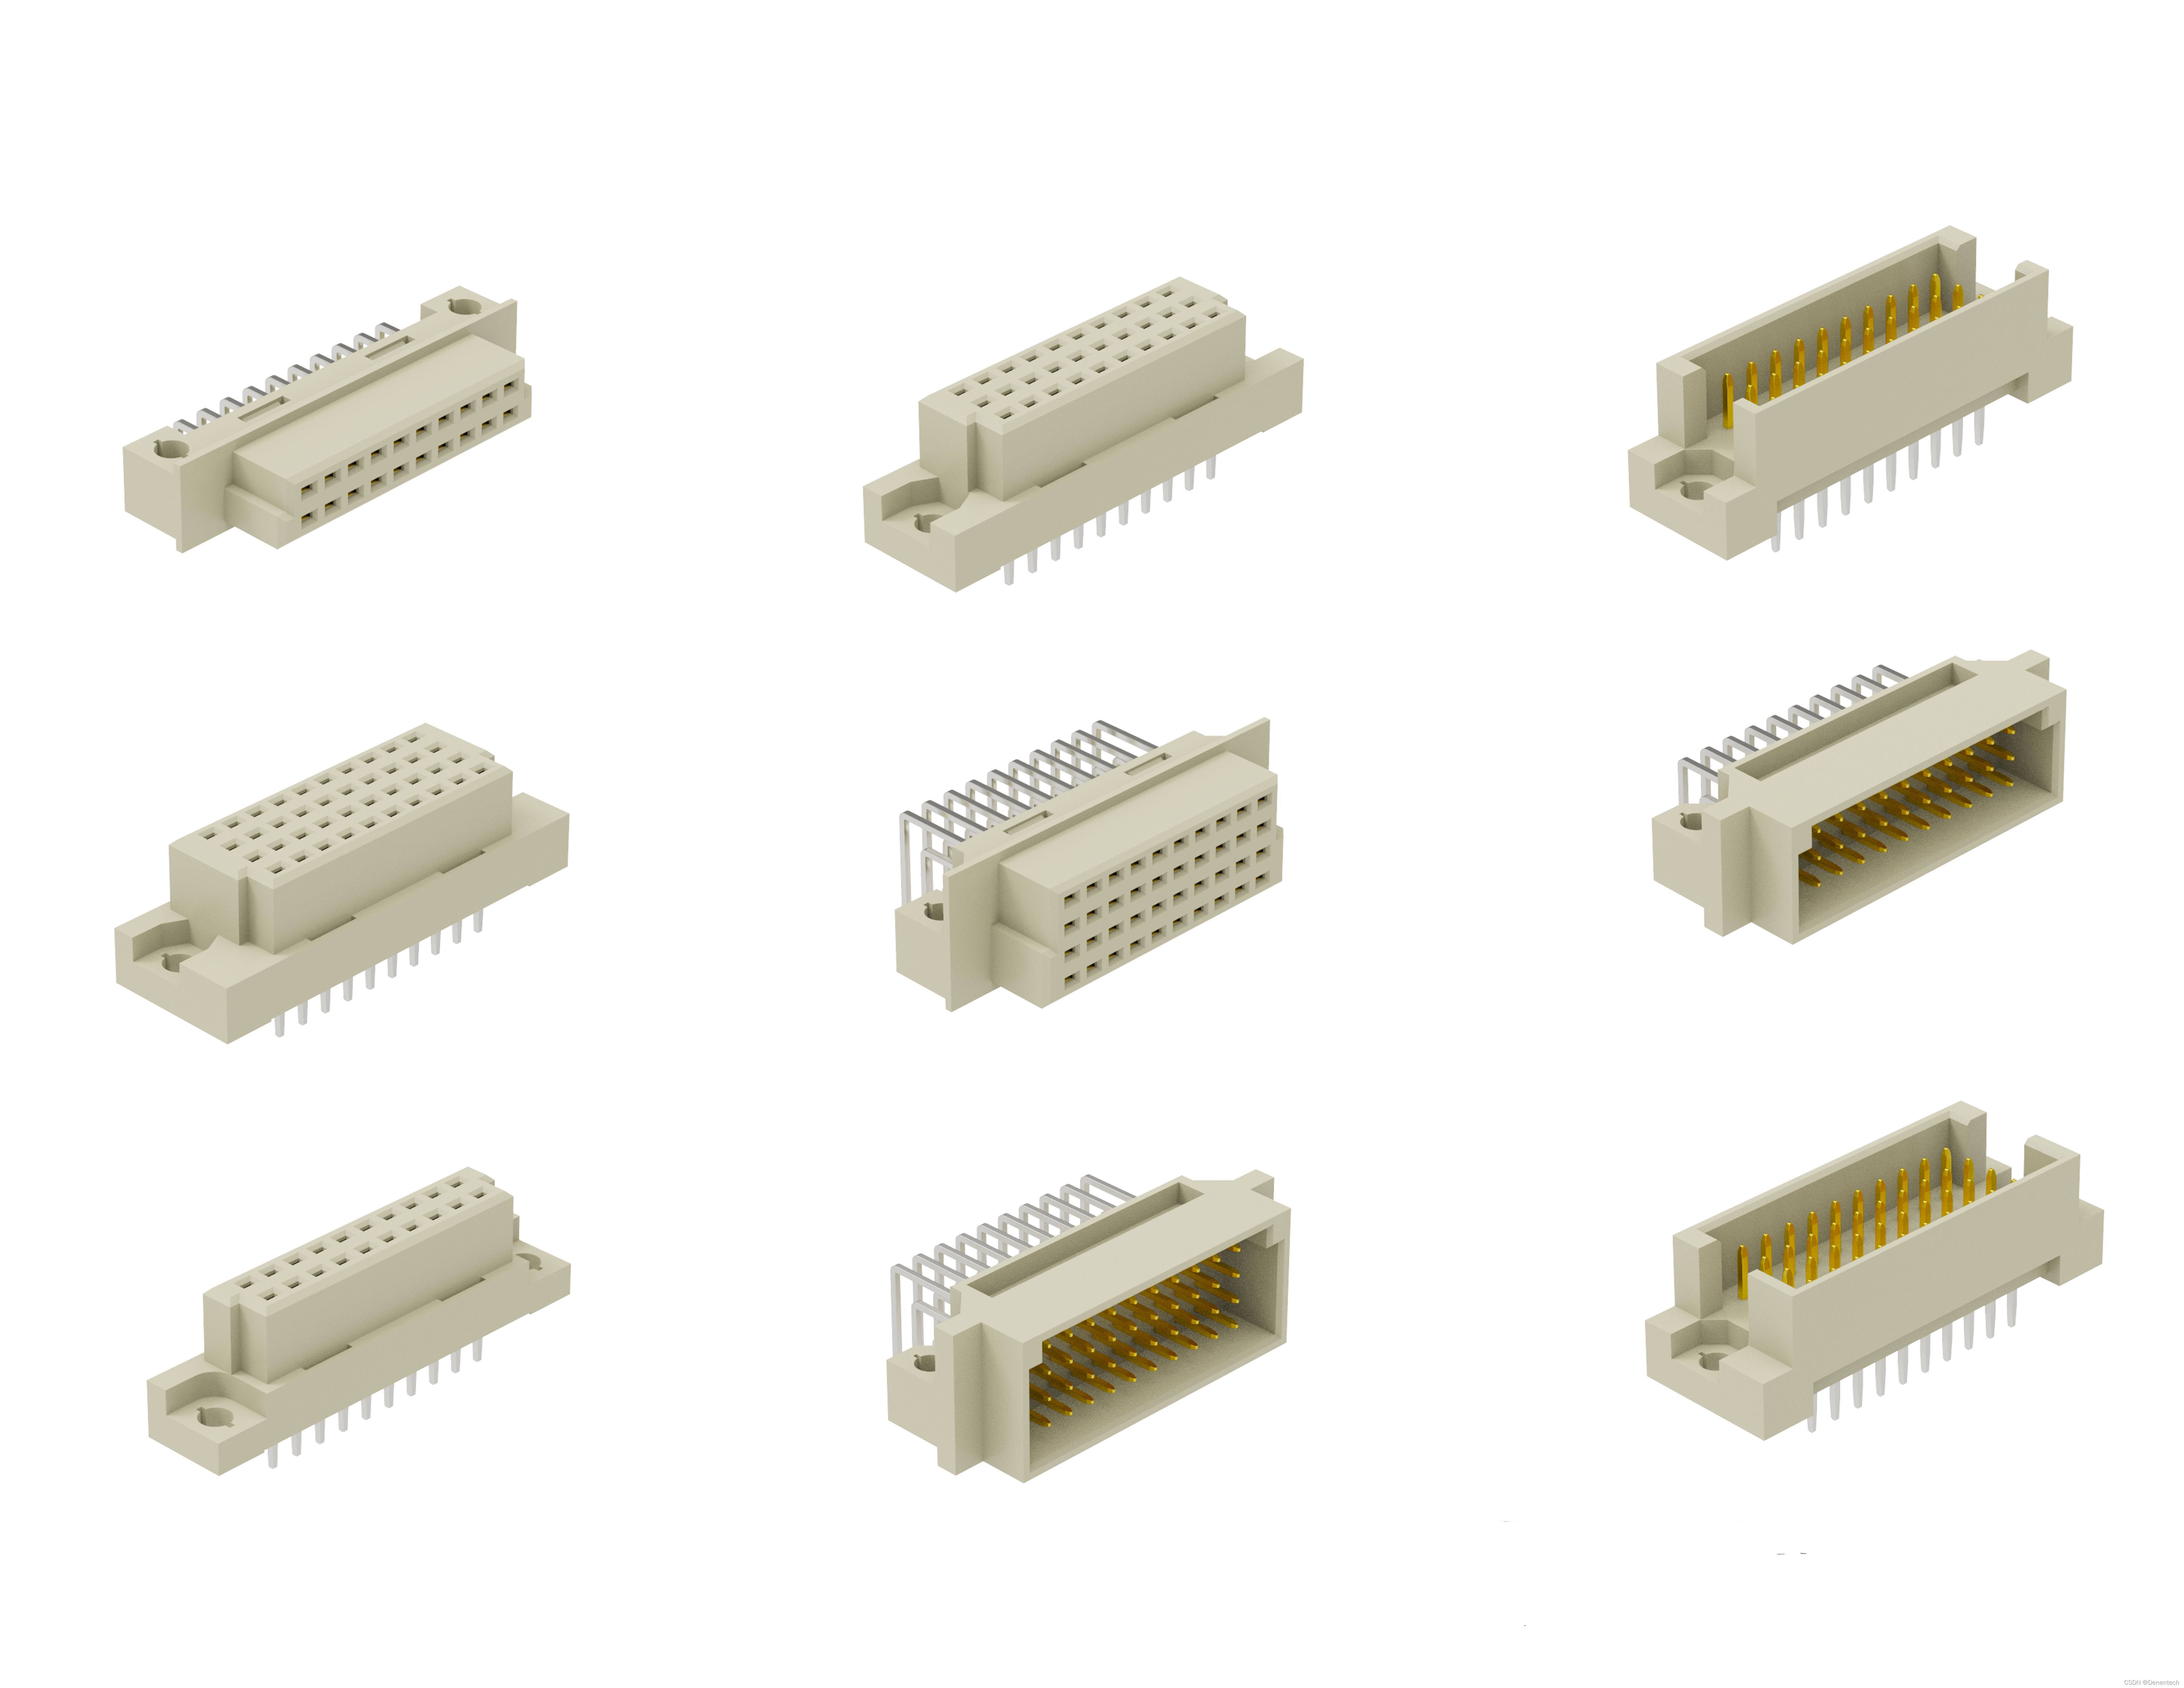 150P Right angle Female Type R DIN 41612 / IEC 60603-2 Connectors